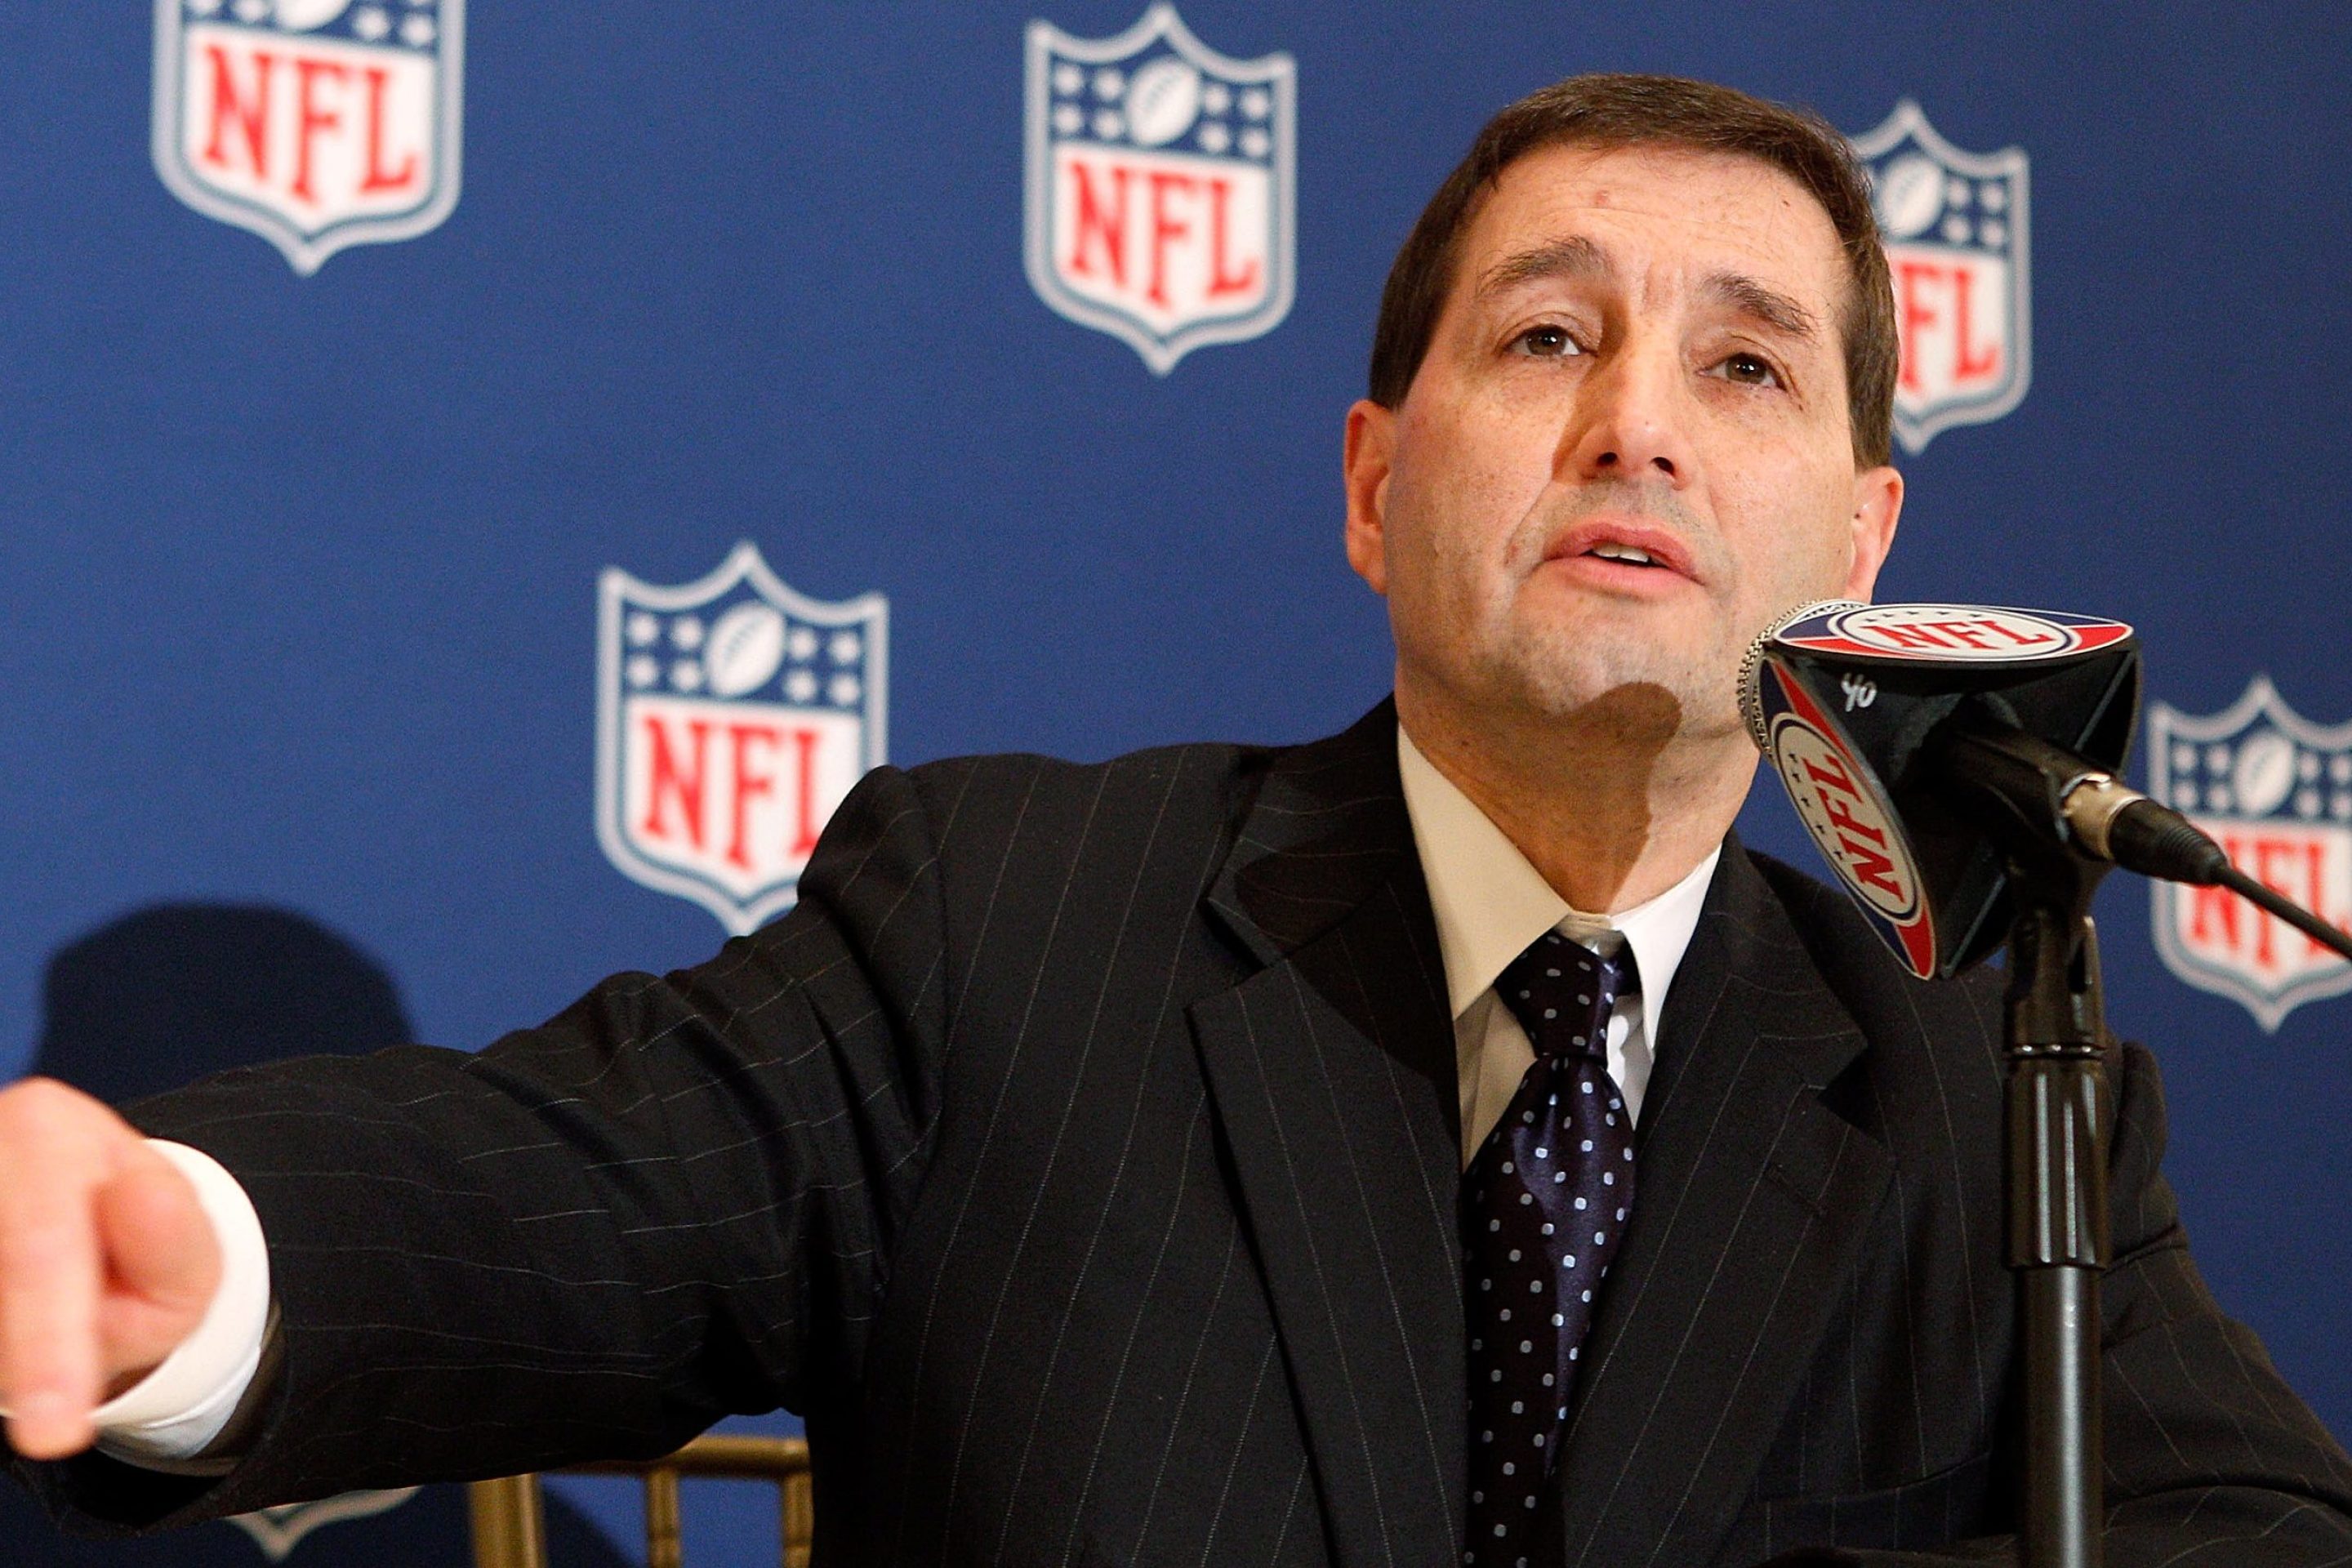 NFL executive Vice President Jeff Pash address the media at the Roosevelt Hotel on March 21, 2011 in New Orleans, Louisiana.